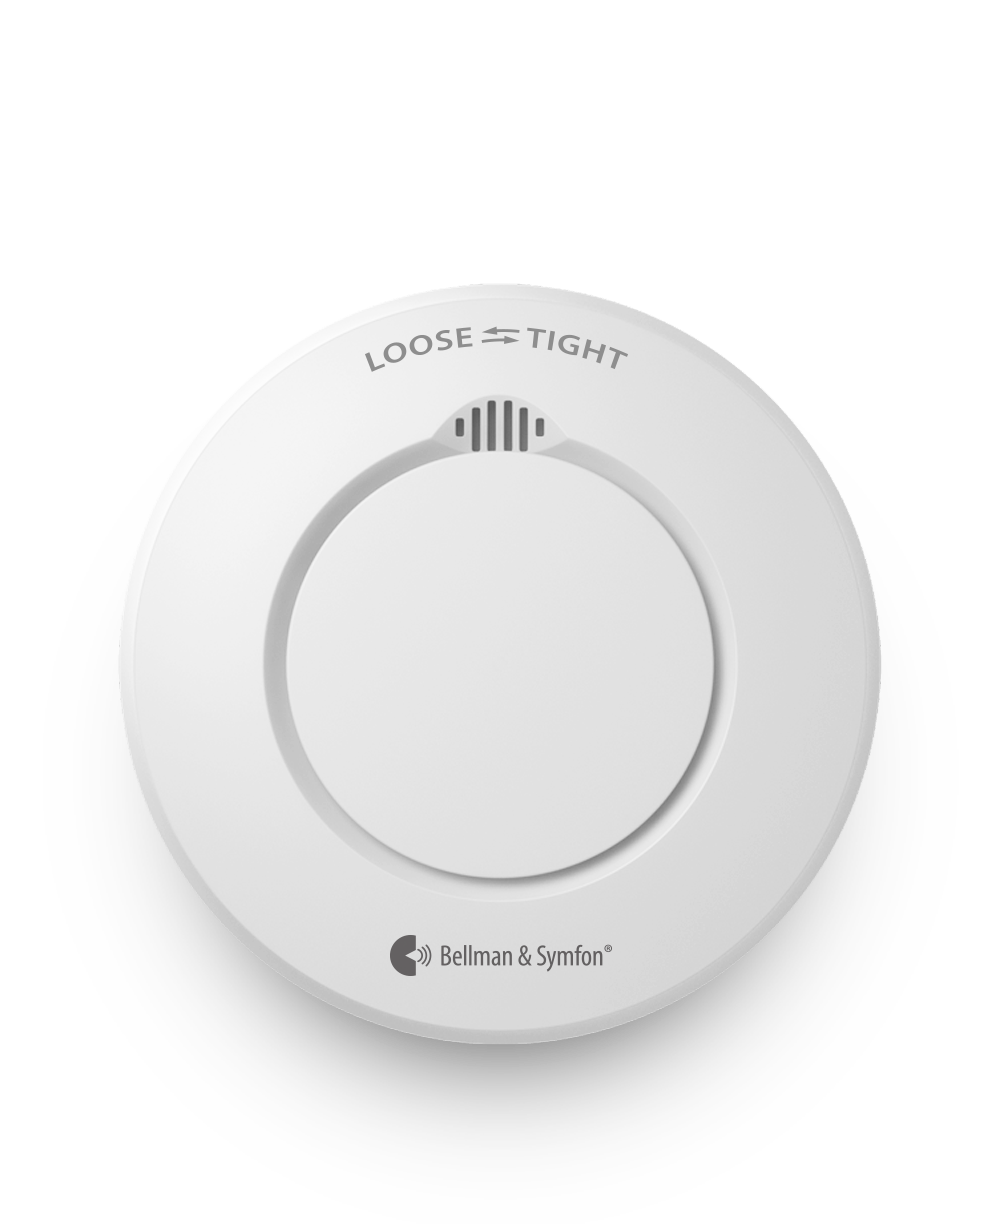 https://bellman.com/globalassets/5---products/alerting-products/be1481-smoke-alarm-transmitter/be1481-intro.png